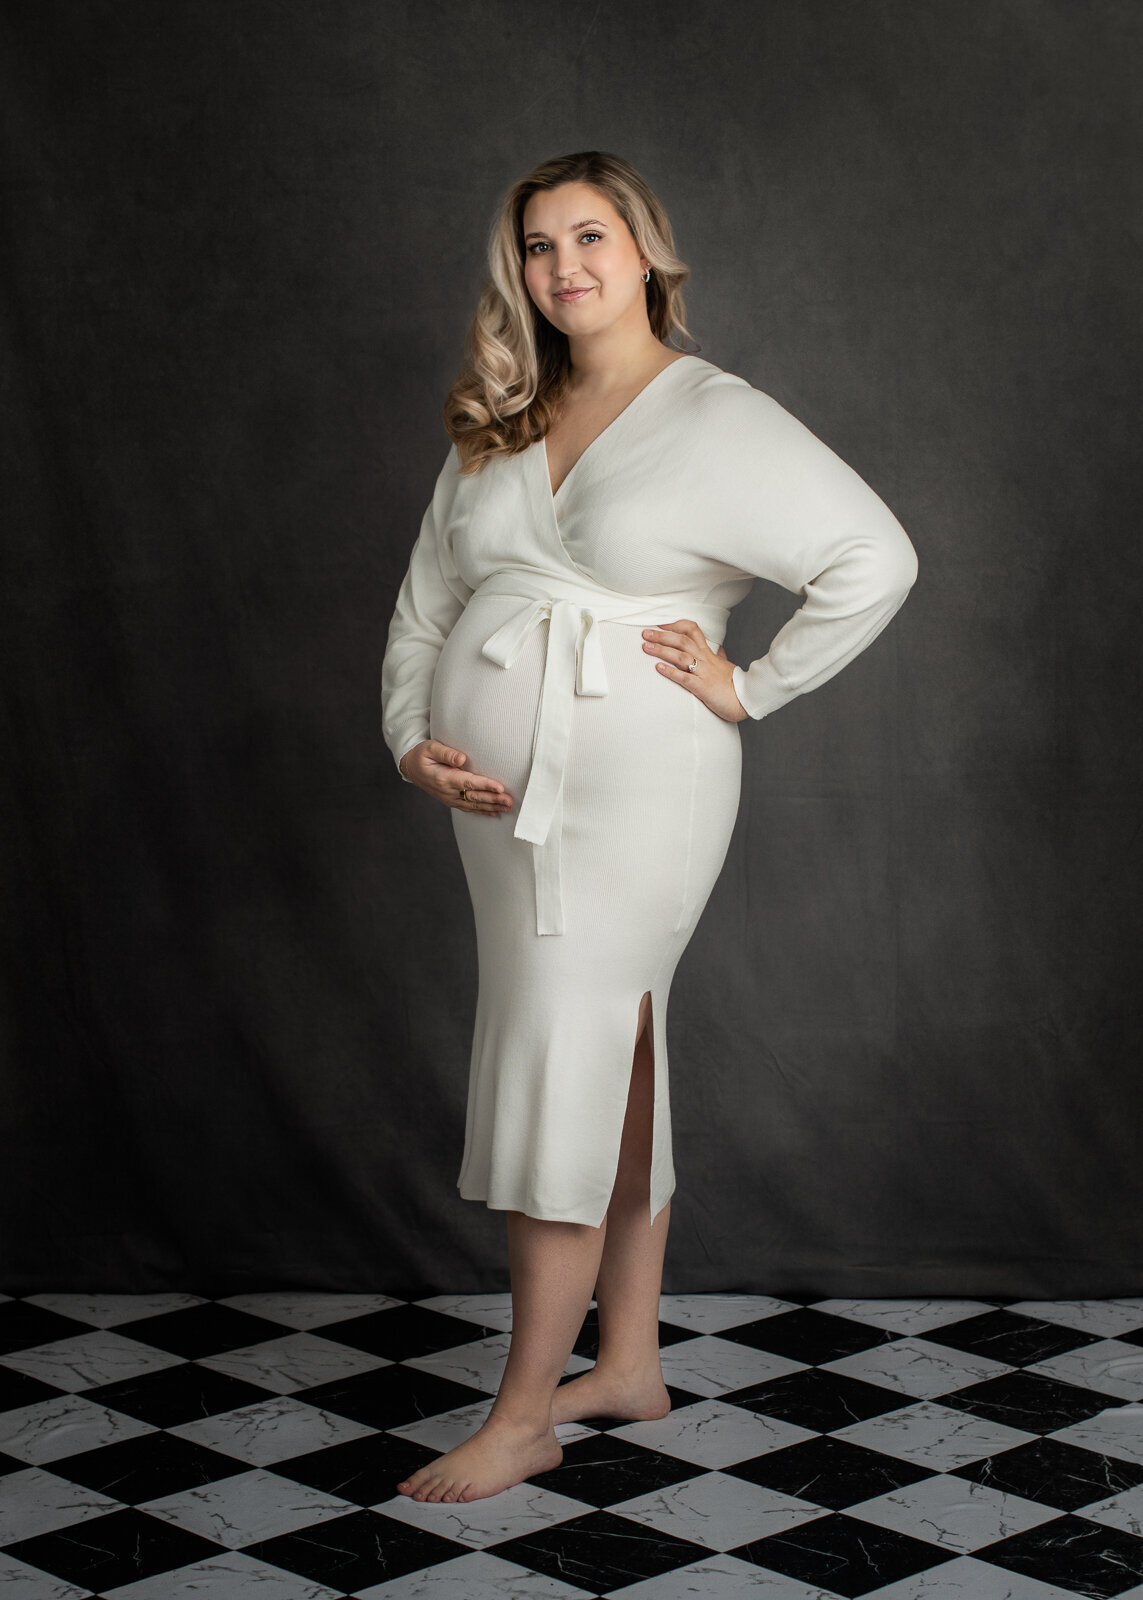 Maternity photo woman with white dress Erin Belles